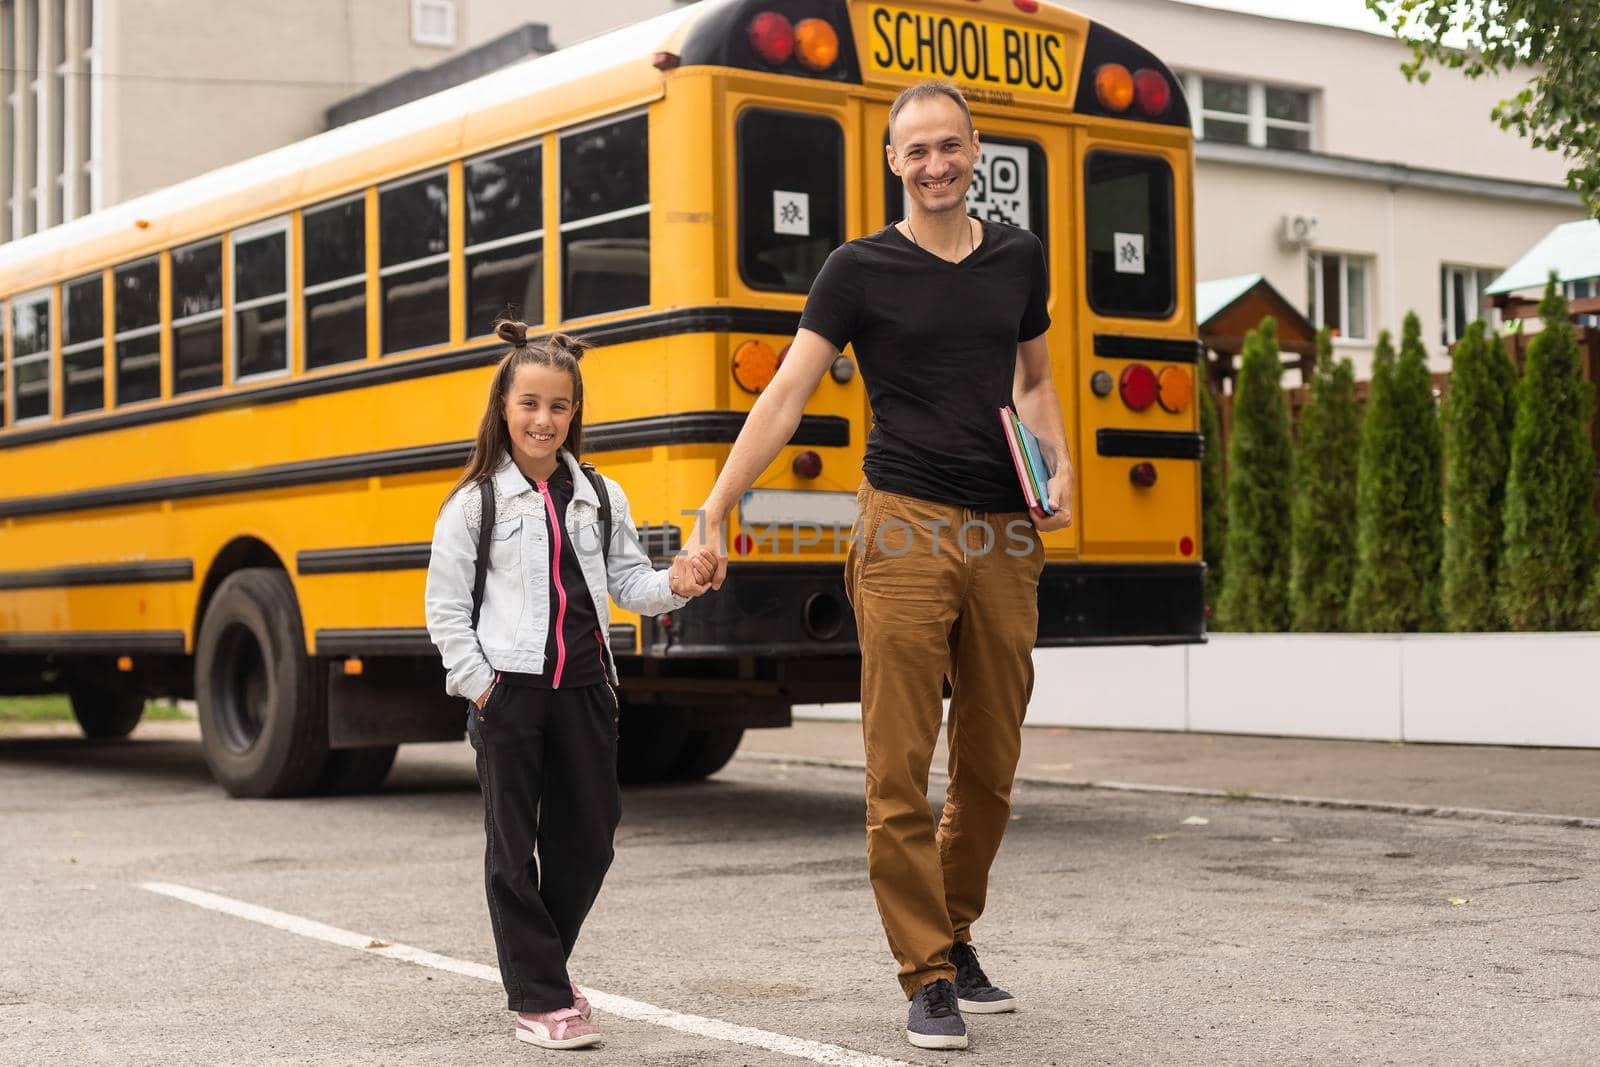 first day at school. father leads a little child school girl in first grade